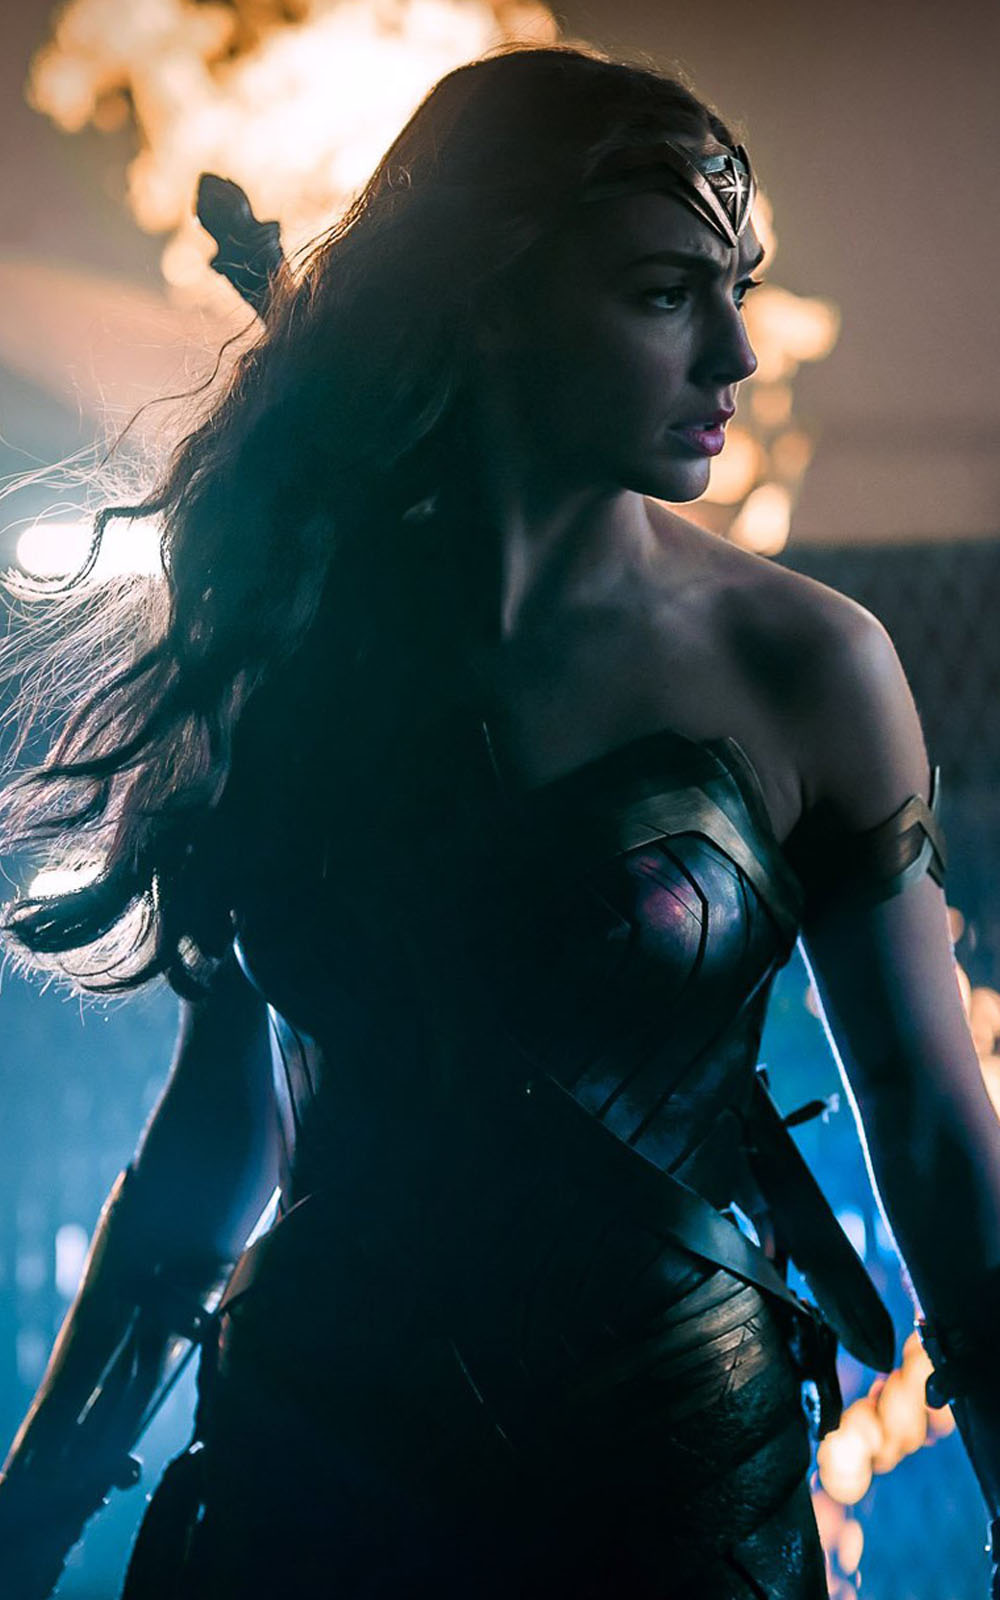 Wonder Woman Justice League - Download Free HD Mobile Wallpapers